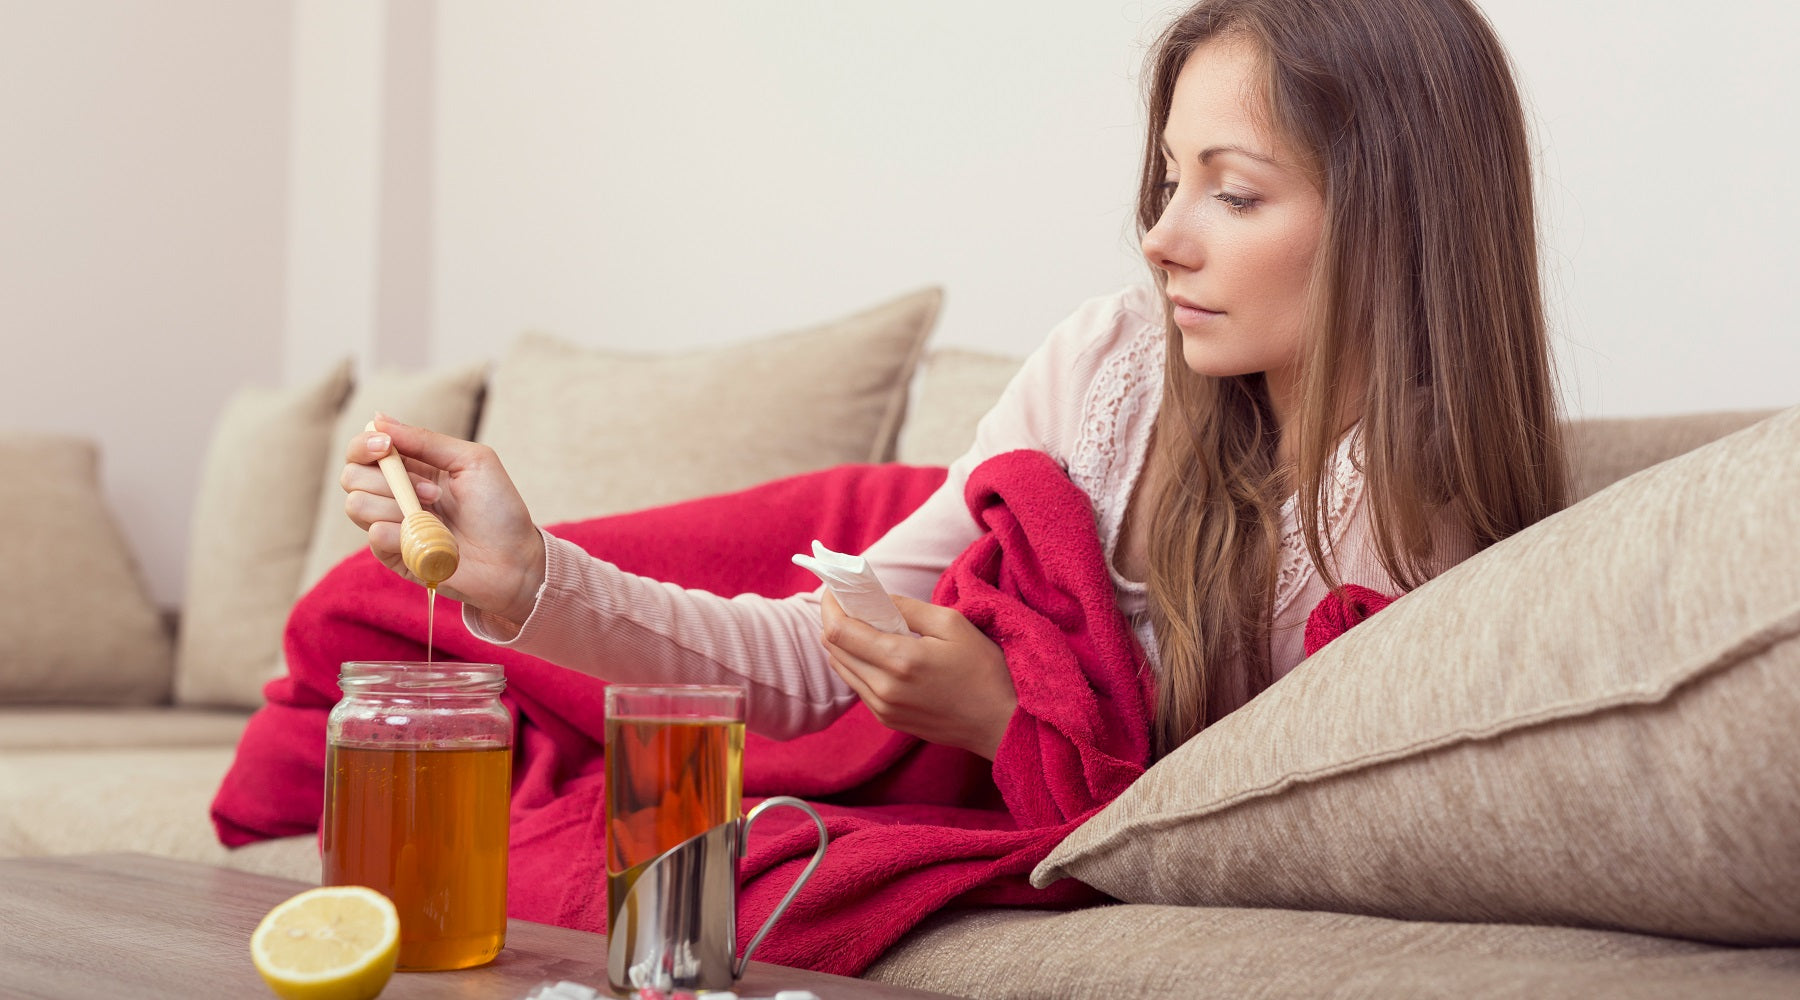 Woman feeling sick lying on the couch with Manuka honey tonic - strengthening the immune system is one of the benefits of Manuka Honey